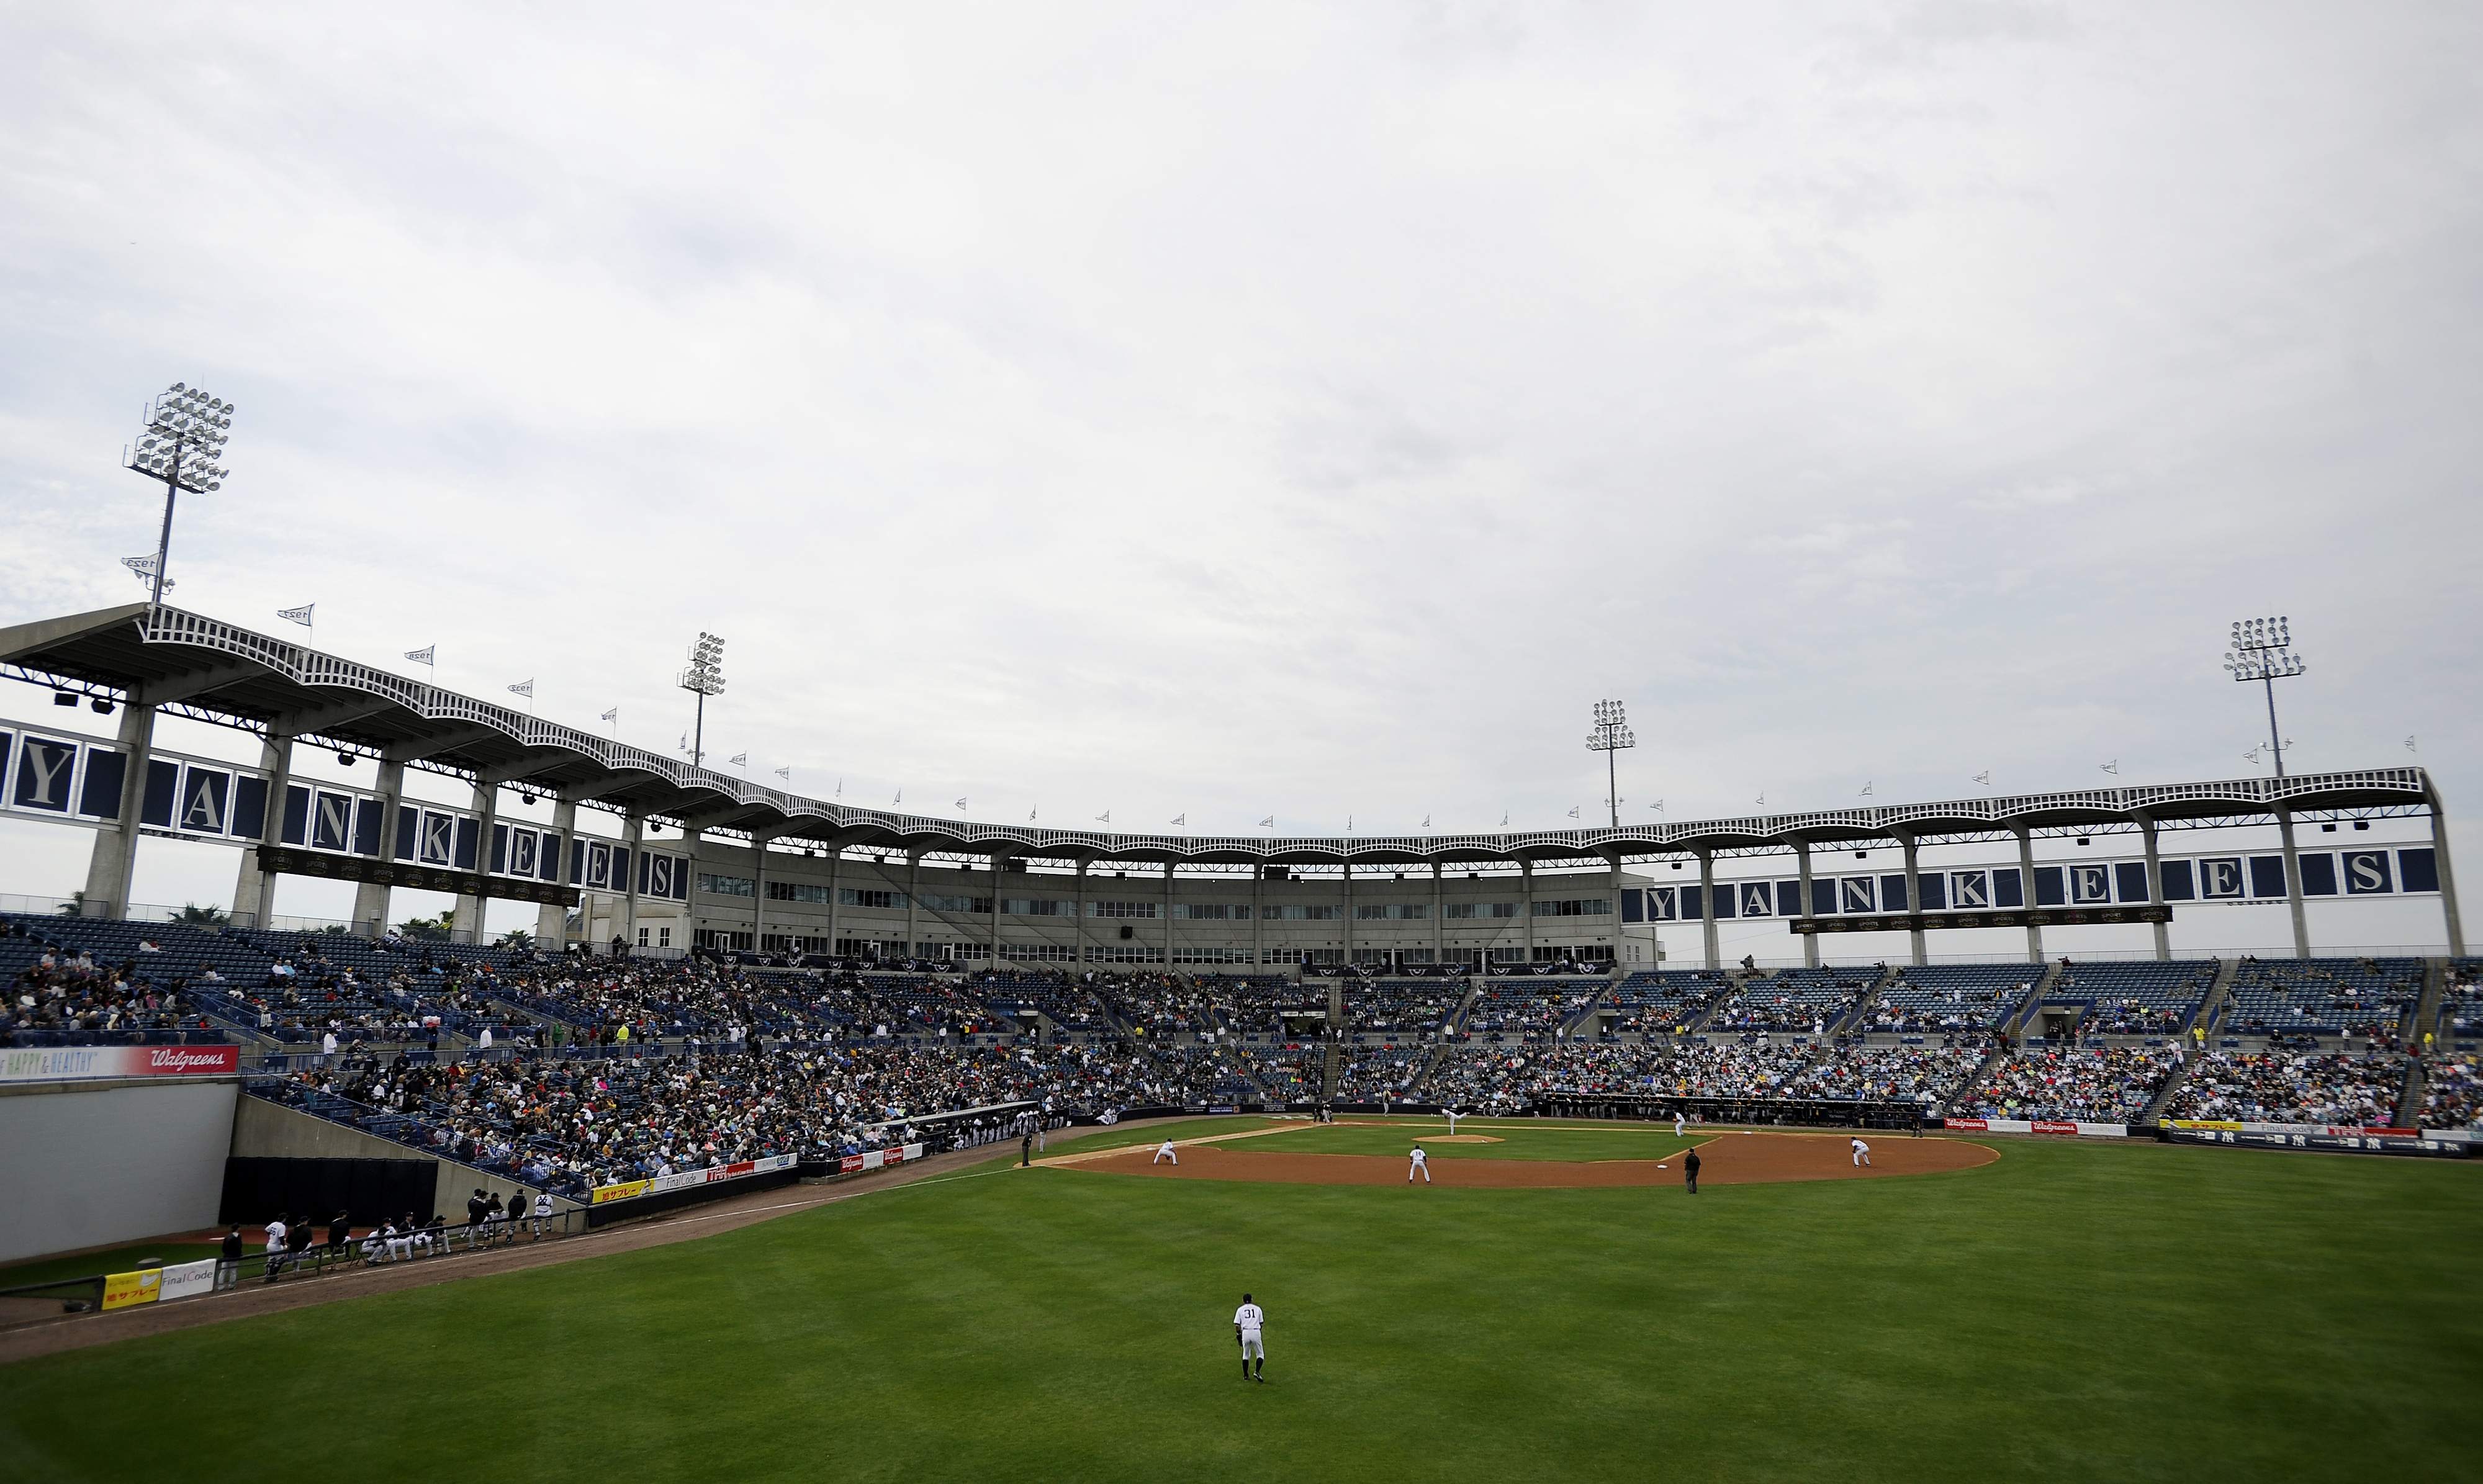 Tampa Sports Authority approves $40 million deal with New York Yankees to  renovate Steinbrenner Field